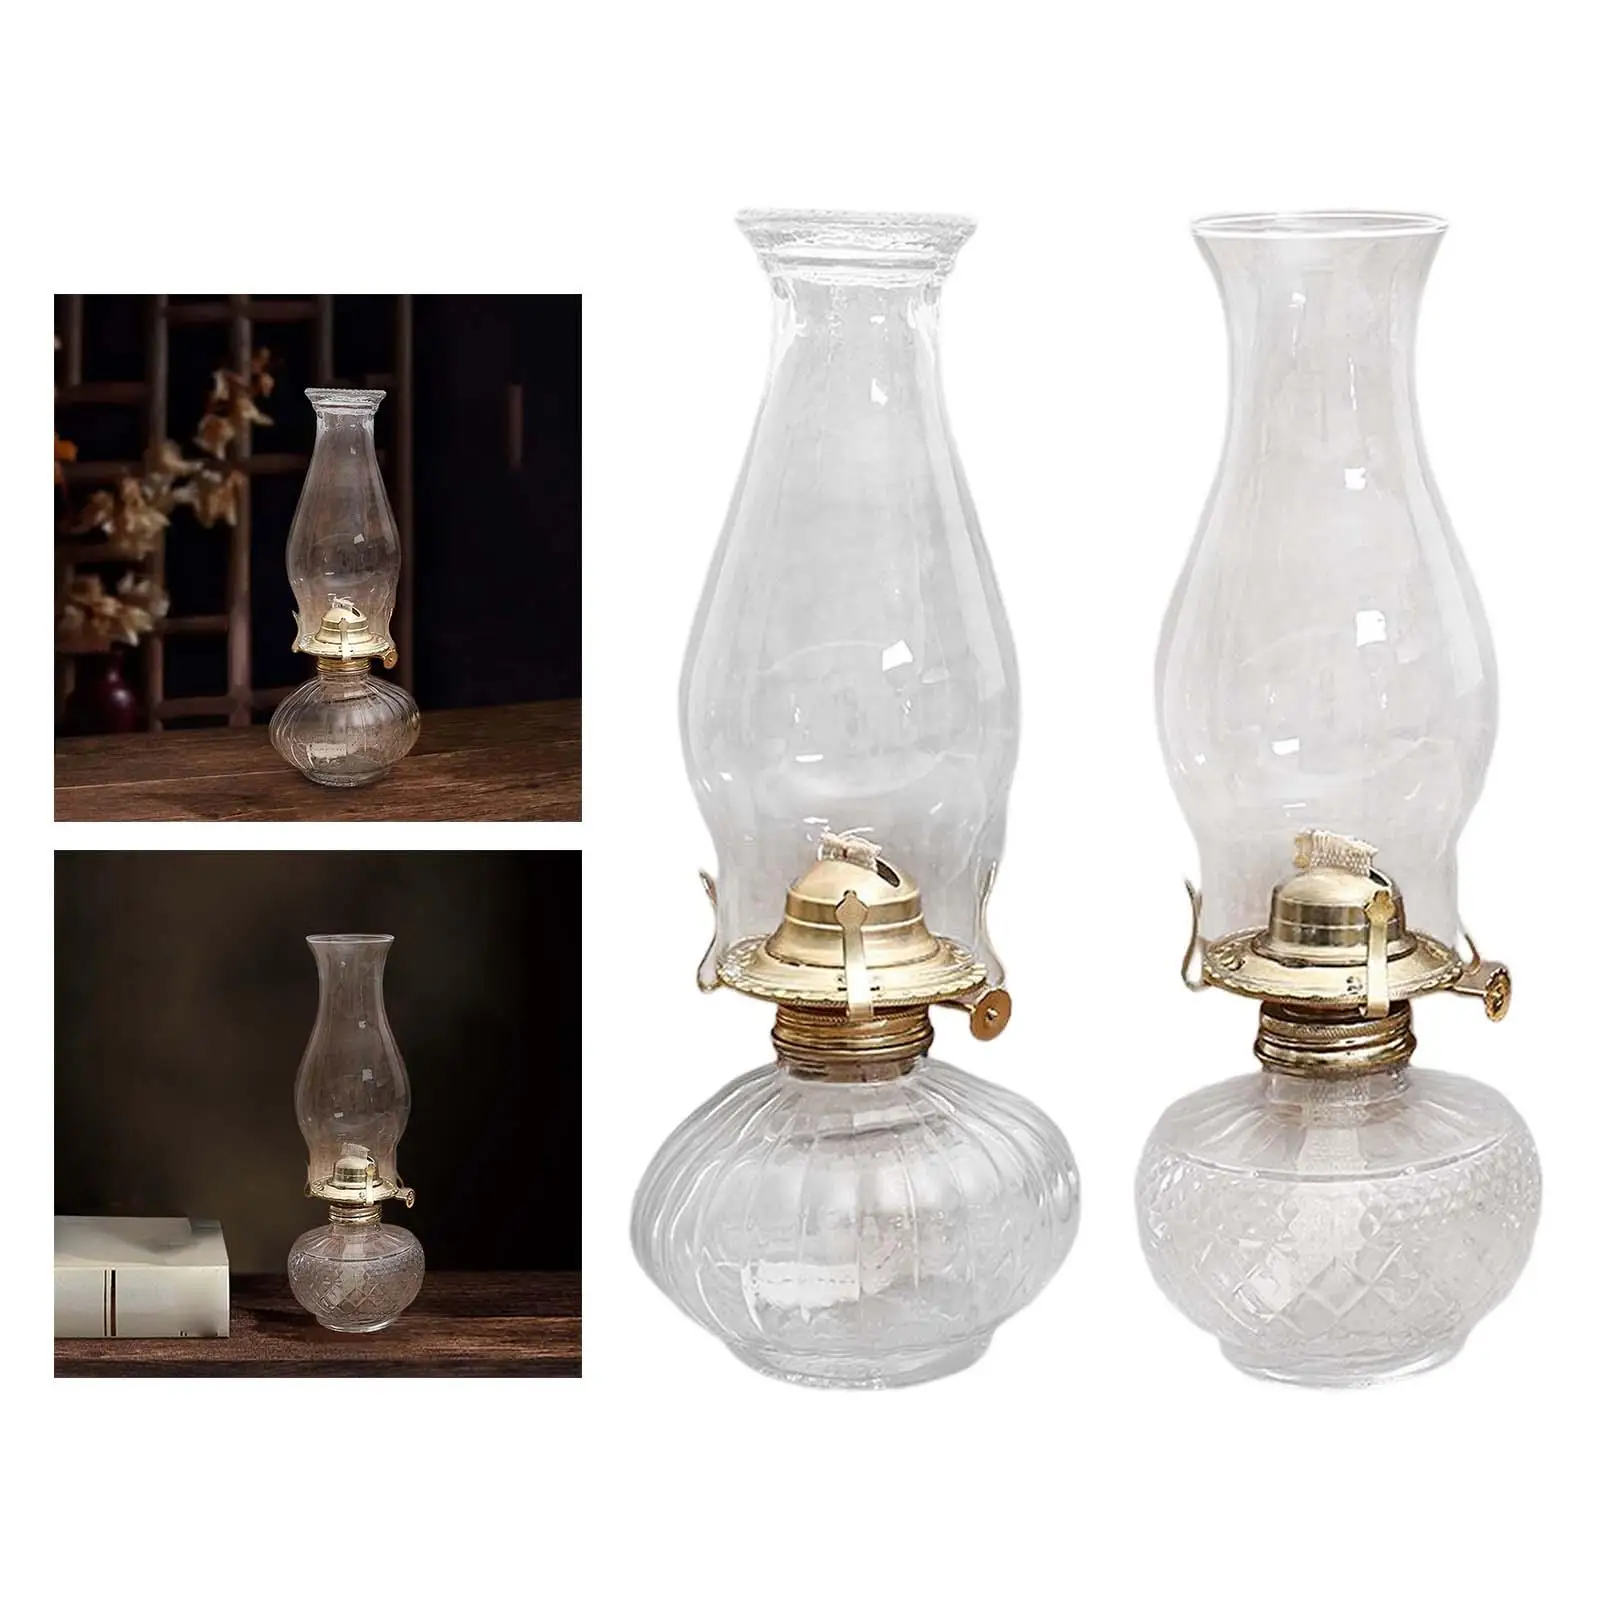 Retro Style Oil Lantern Buddhist Altar Supplies with Lamp Wick Portable Glass for Emergency Table Patio Christmas Ornament